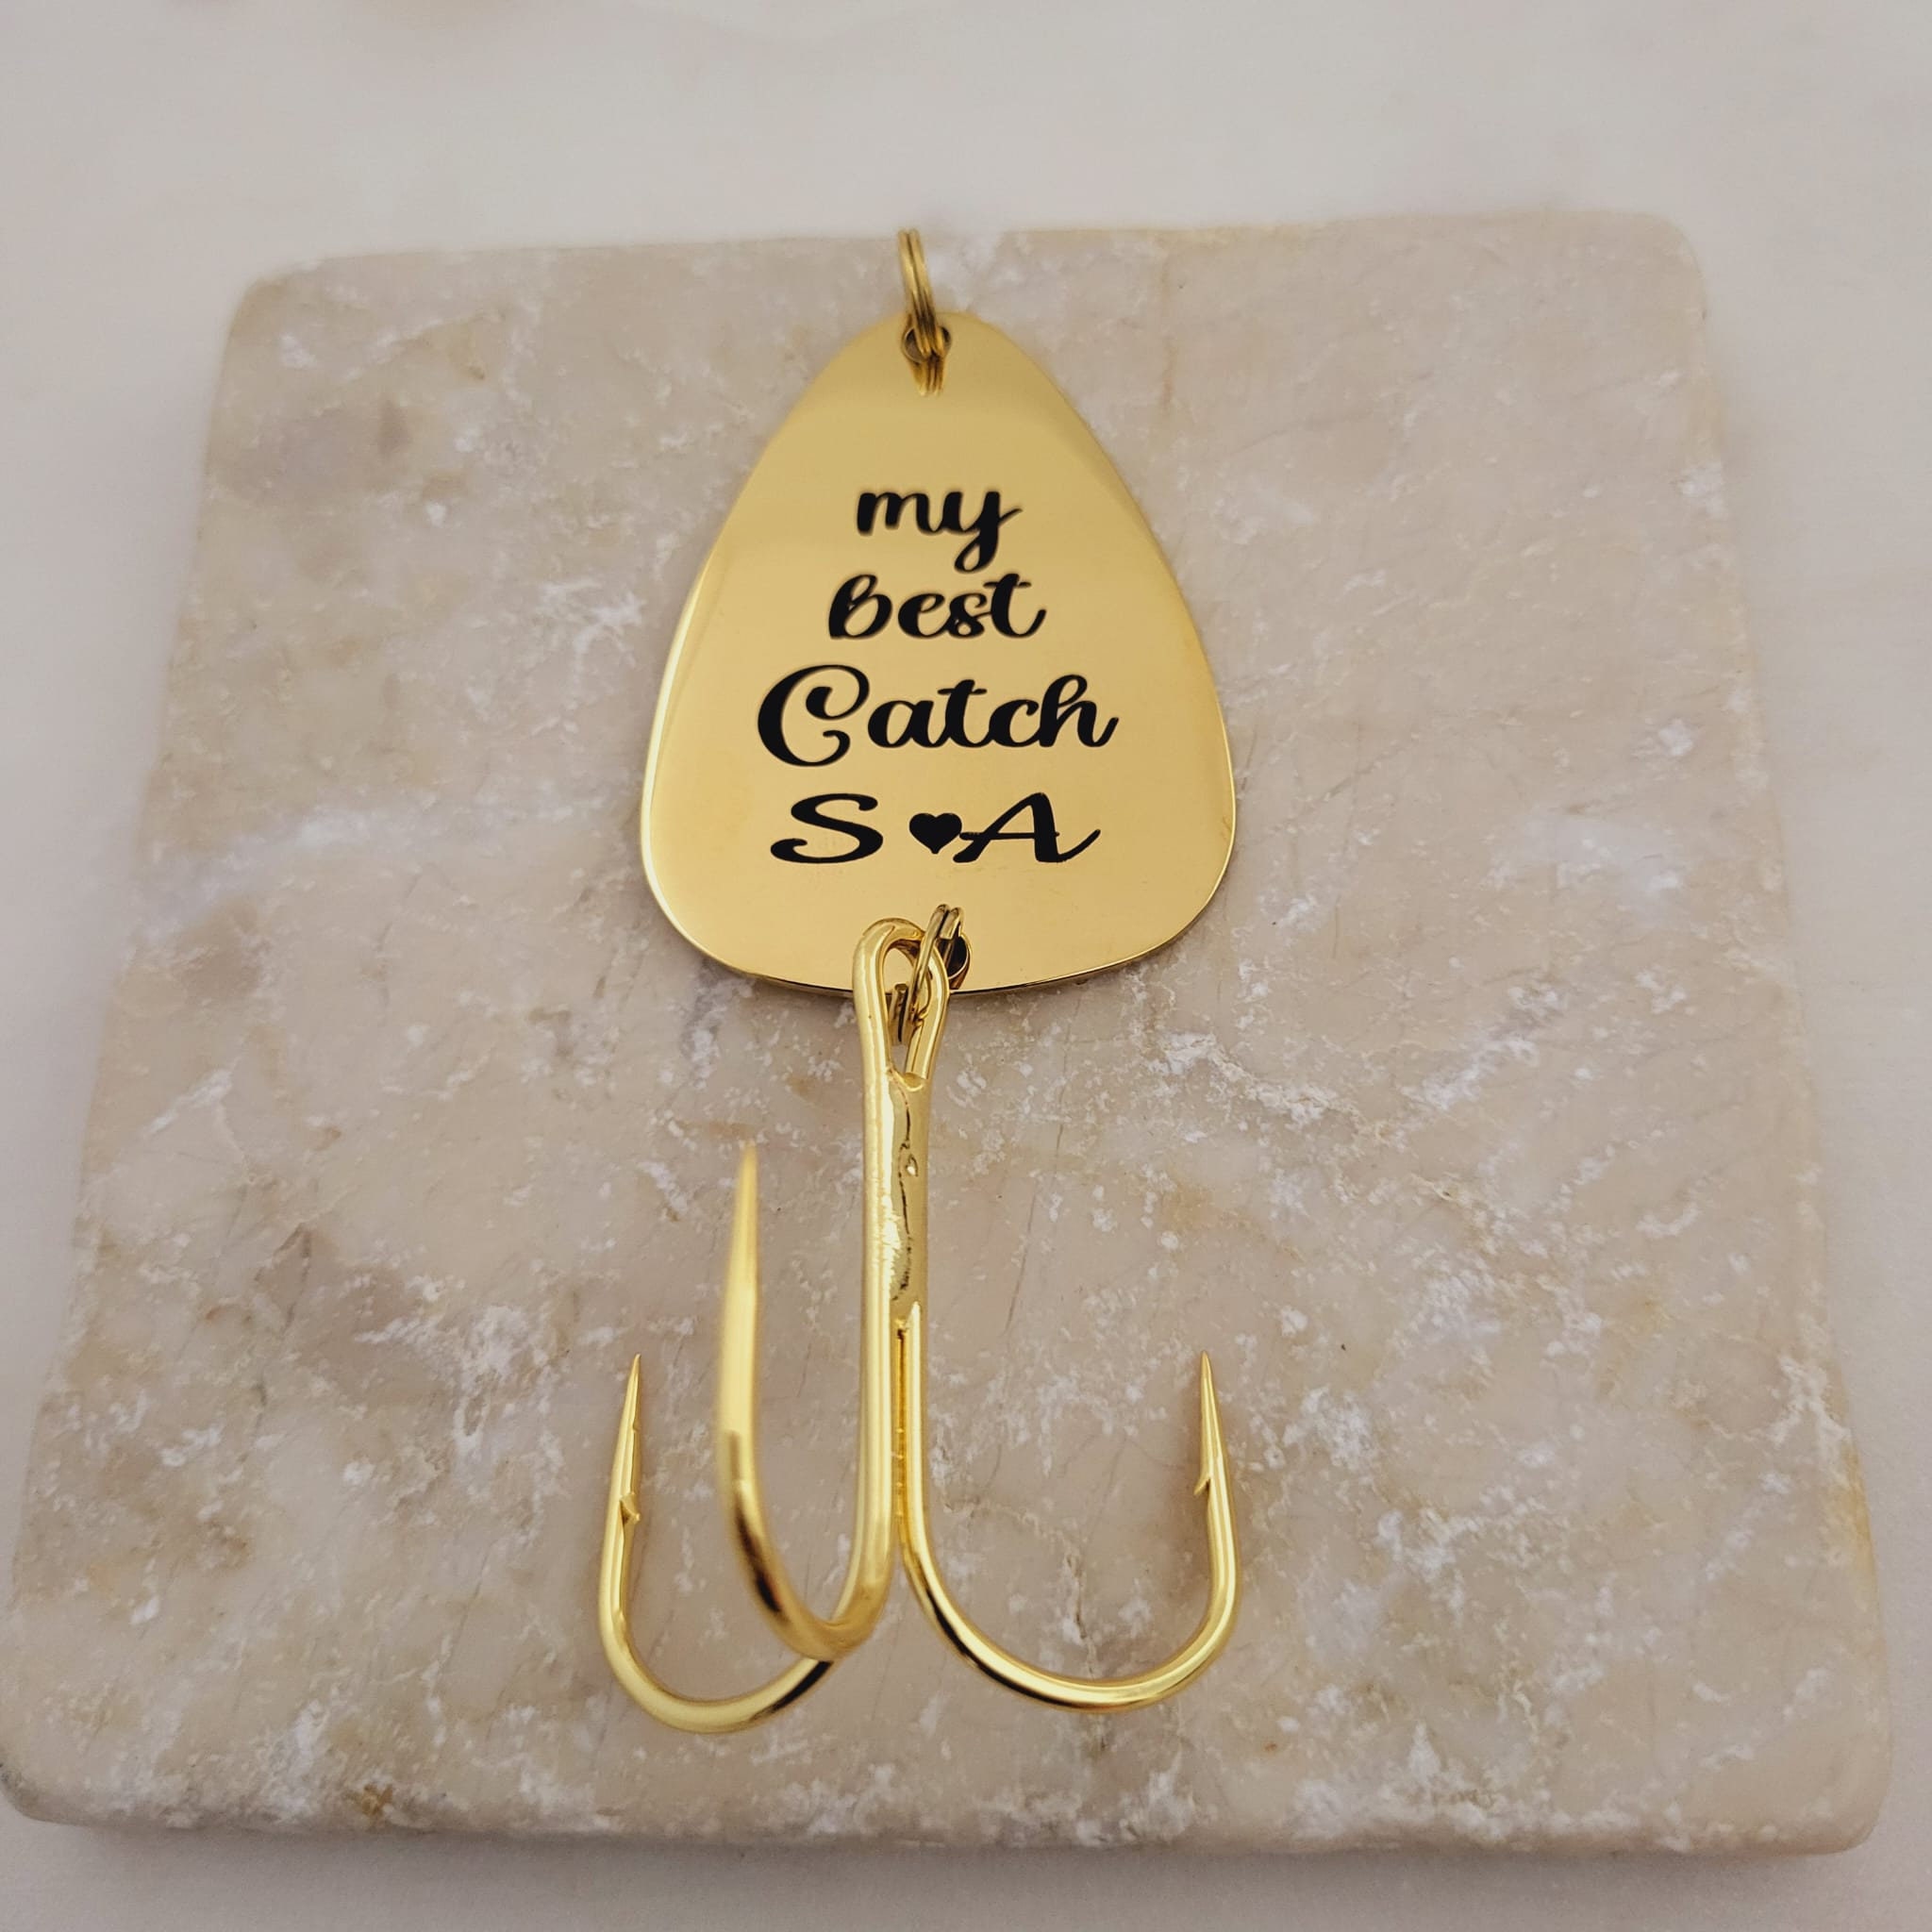 My Best Catch Fish Hook, Mens Valentine Gift Ideas - Personalized